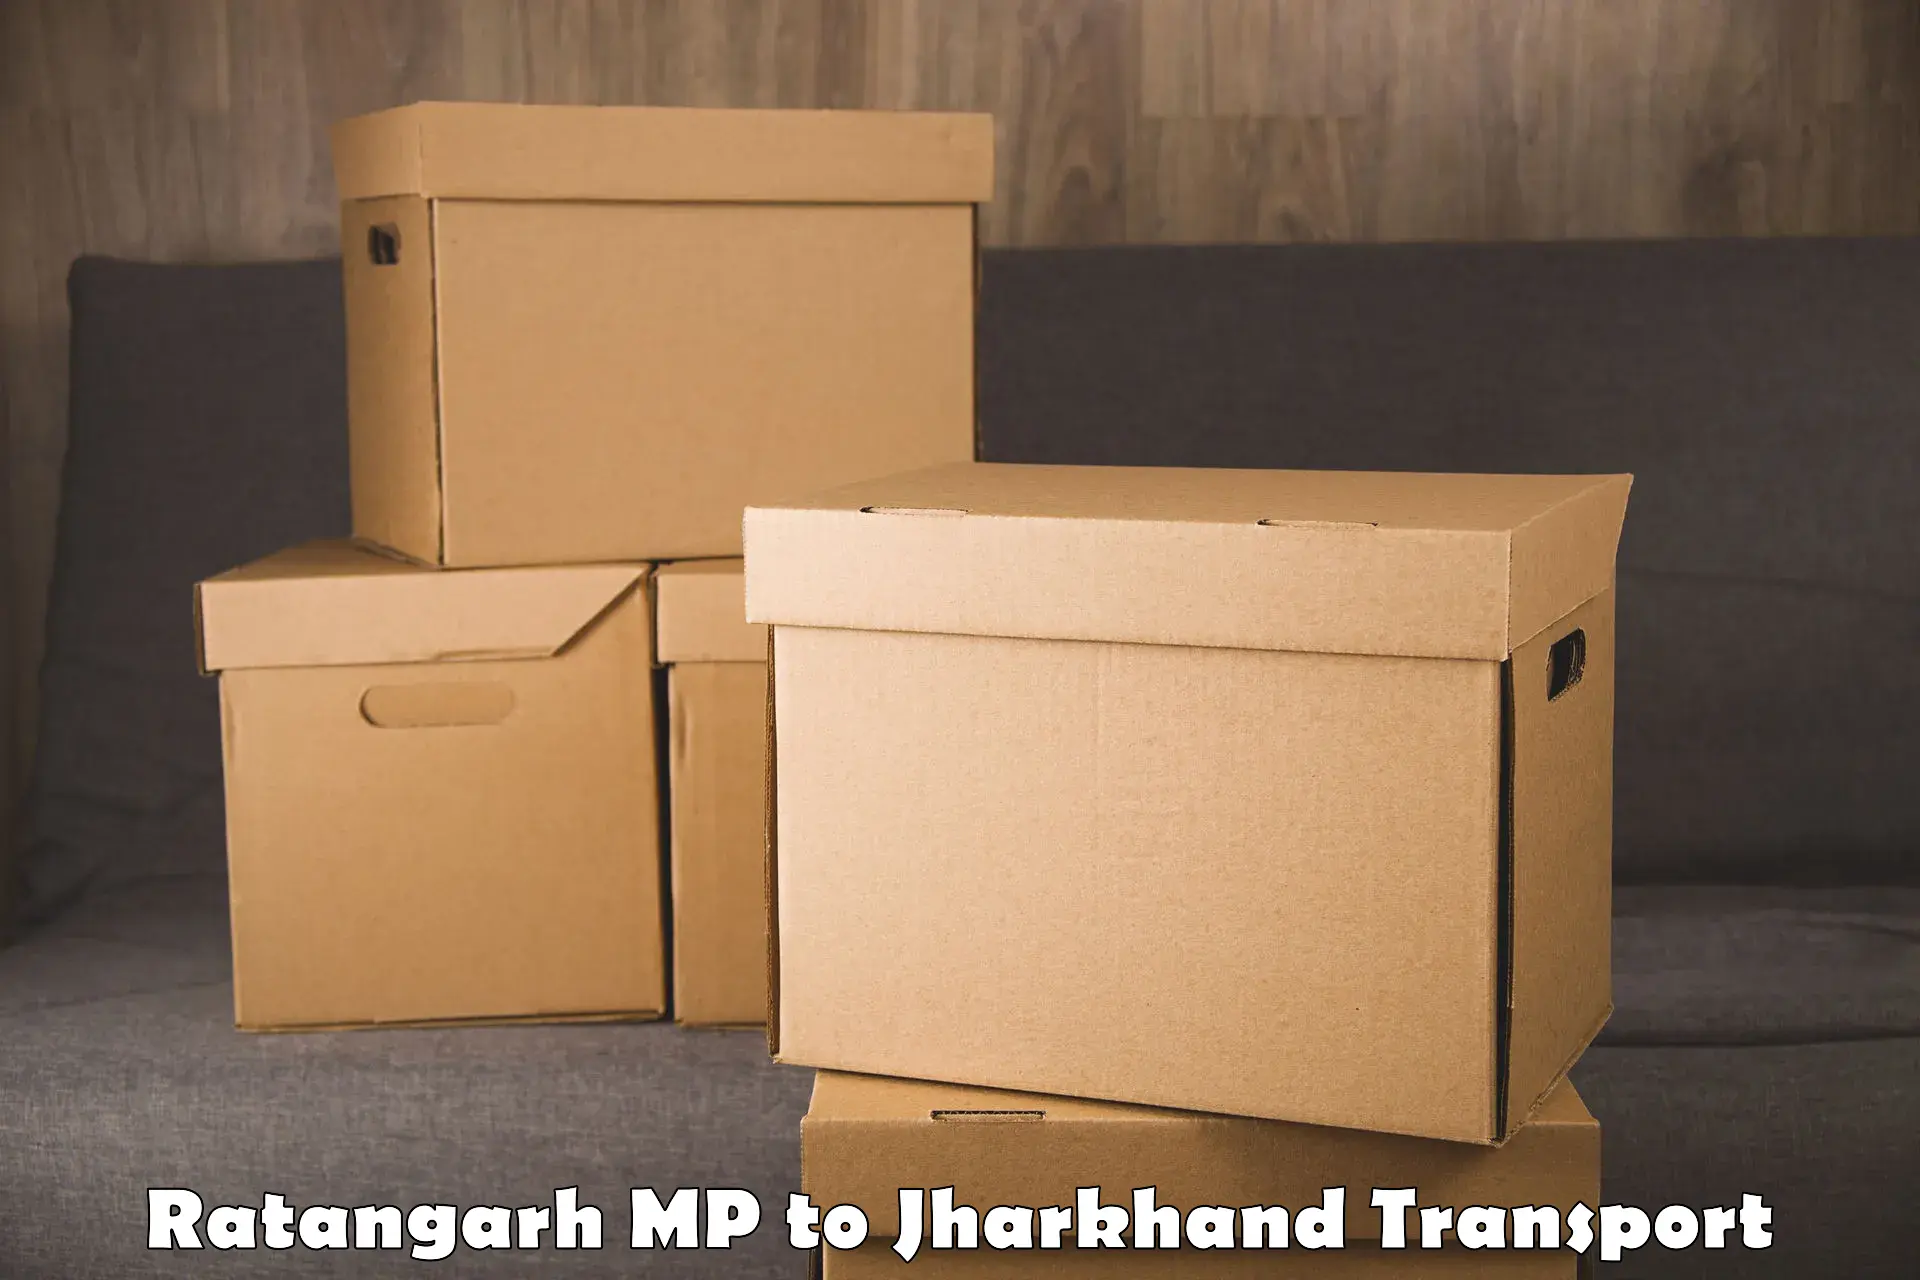 Best transport services in India Ratangarh MP to Dhalbhumgarh